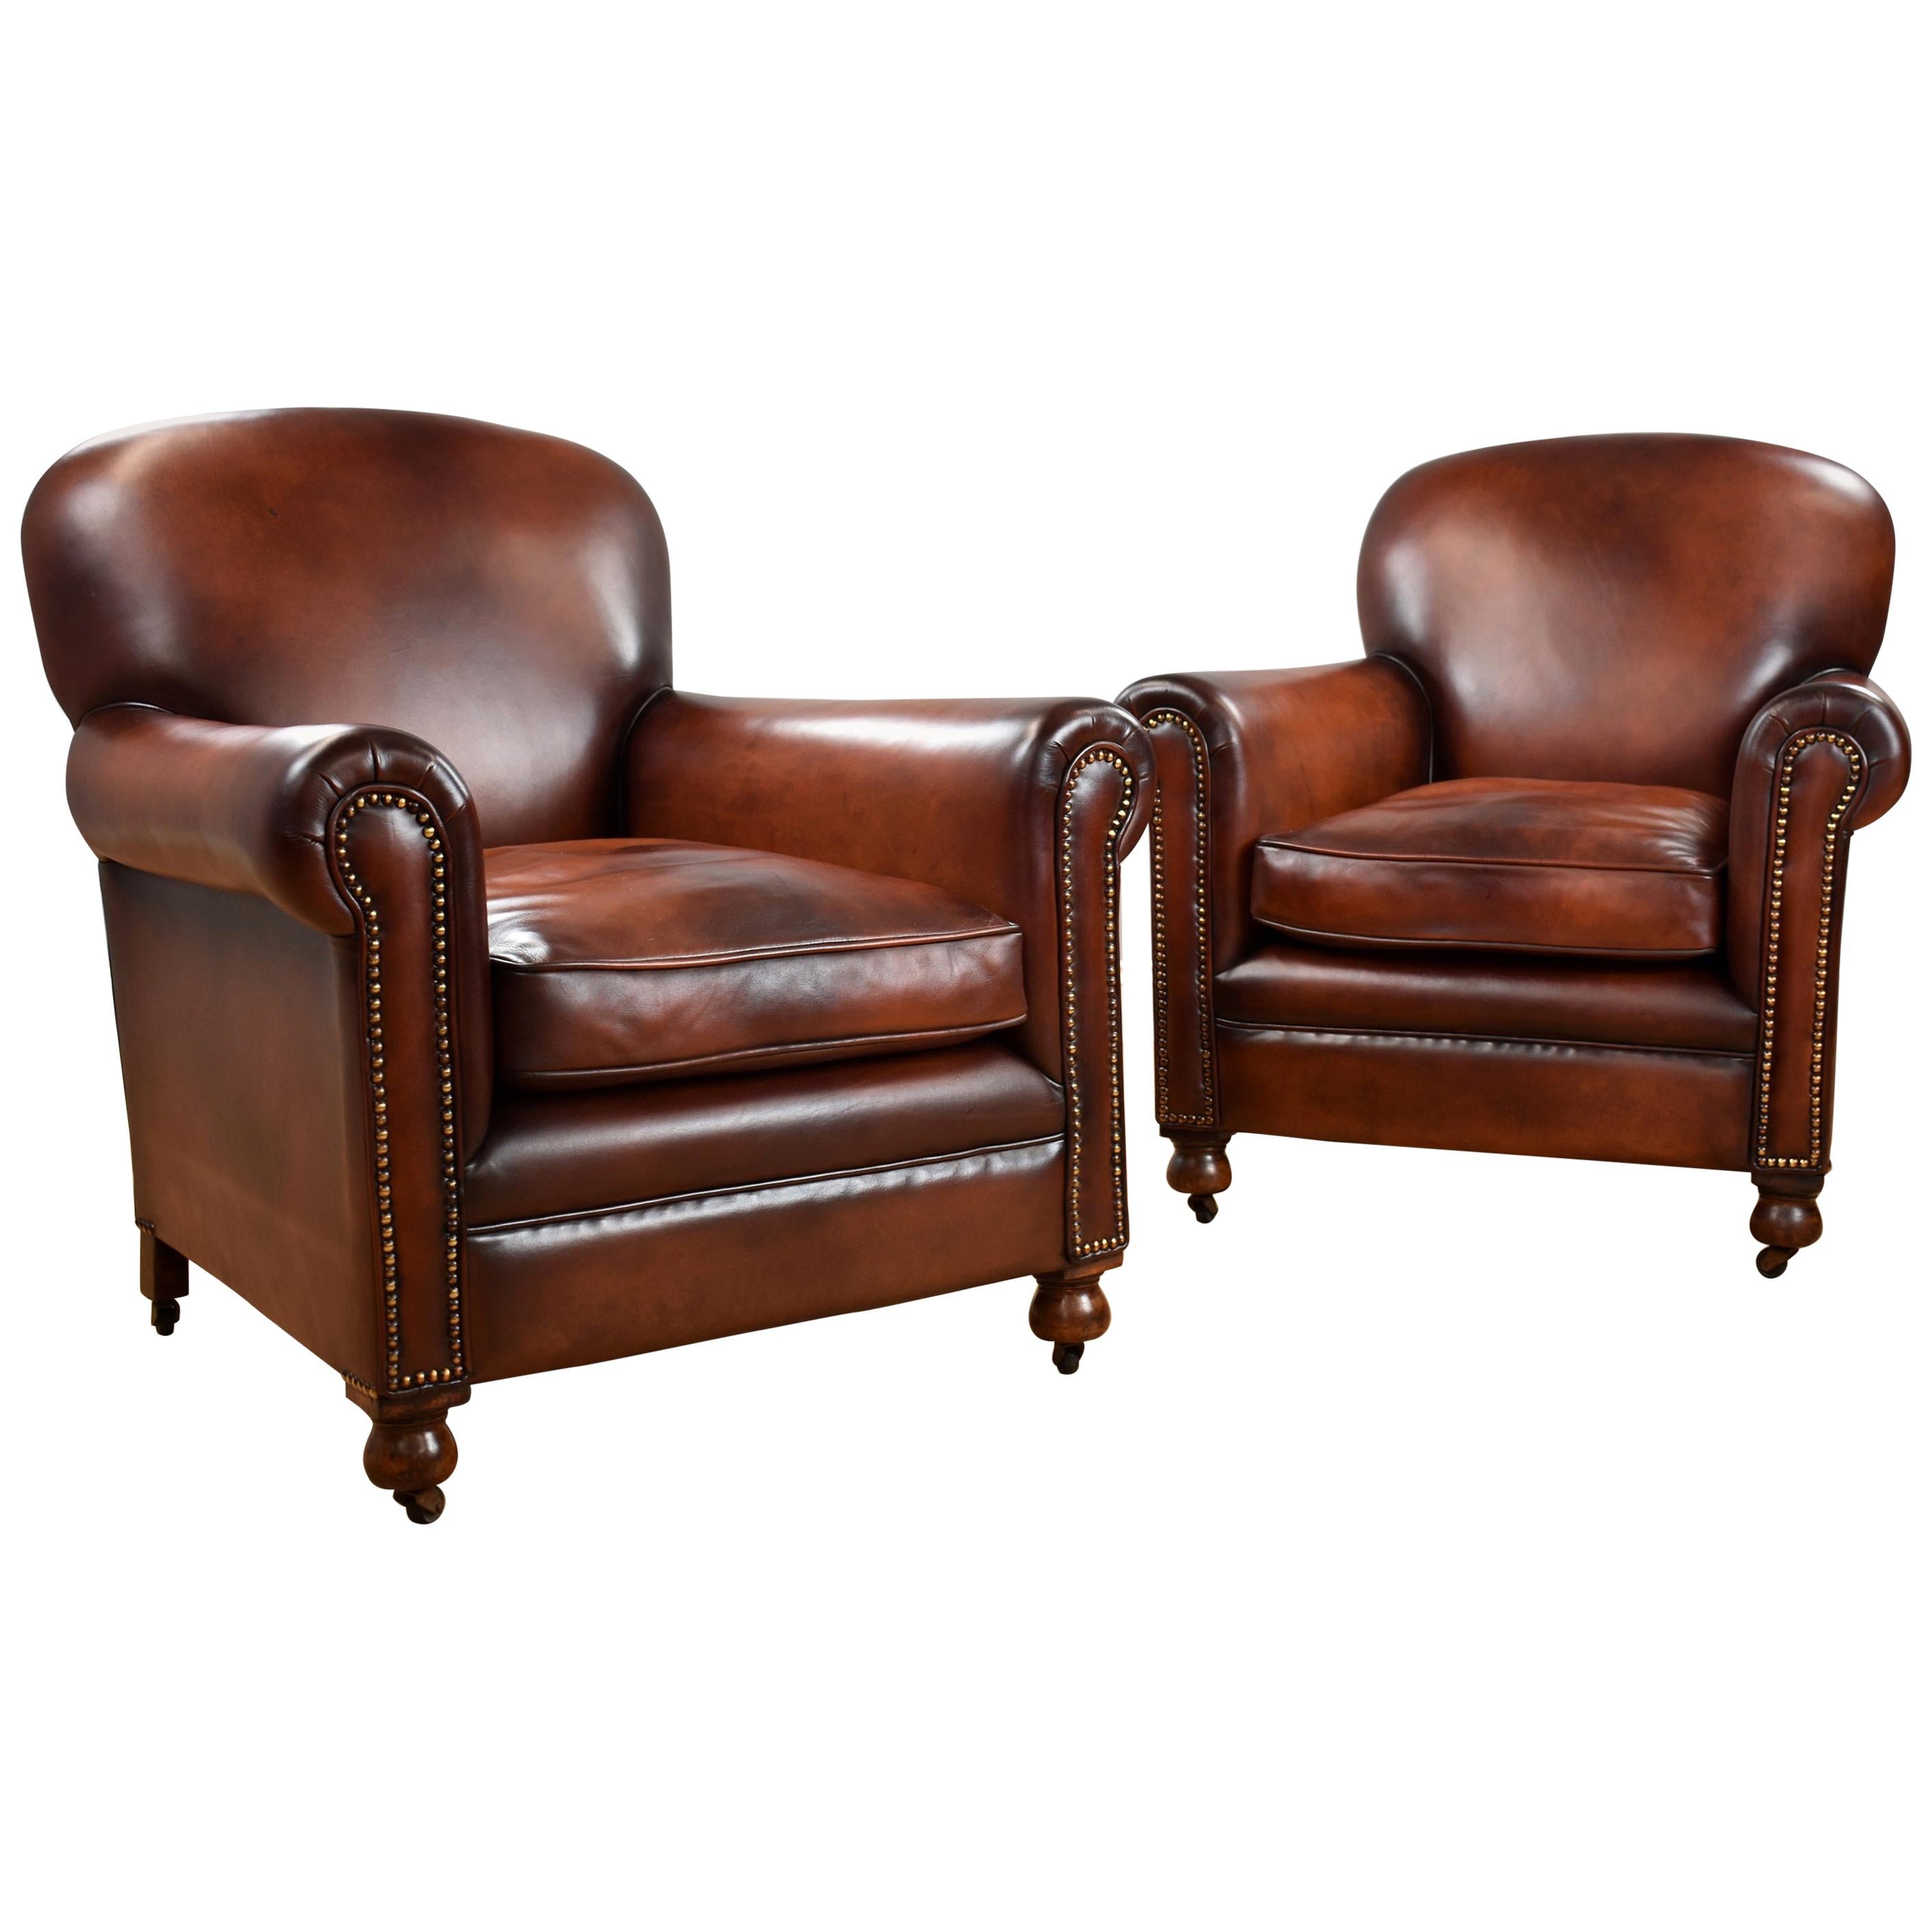 Pair of Han Dyed Honey Brown Leather Armchairs